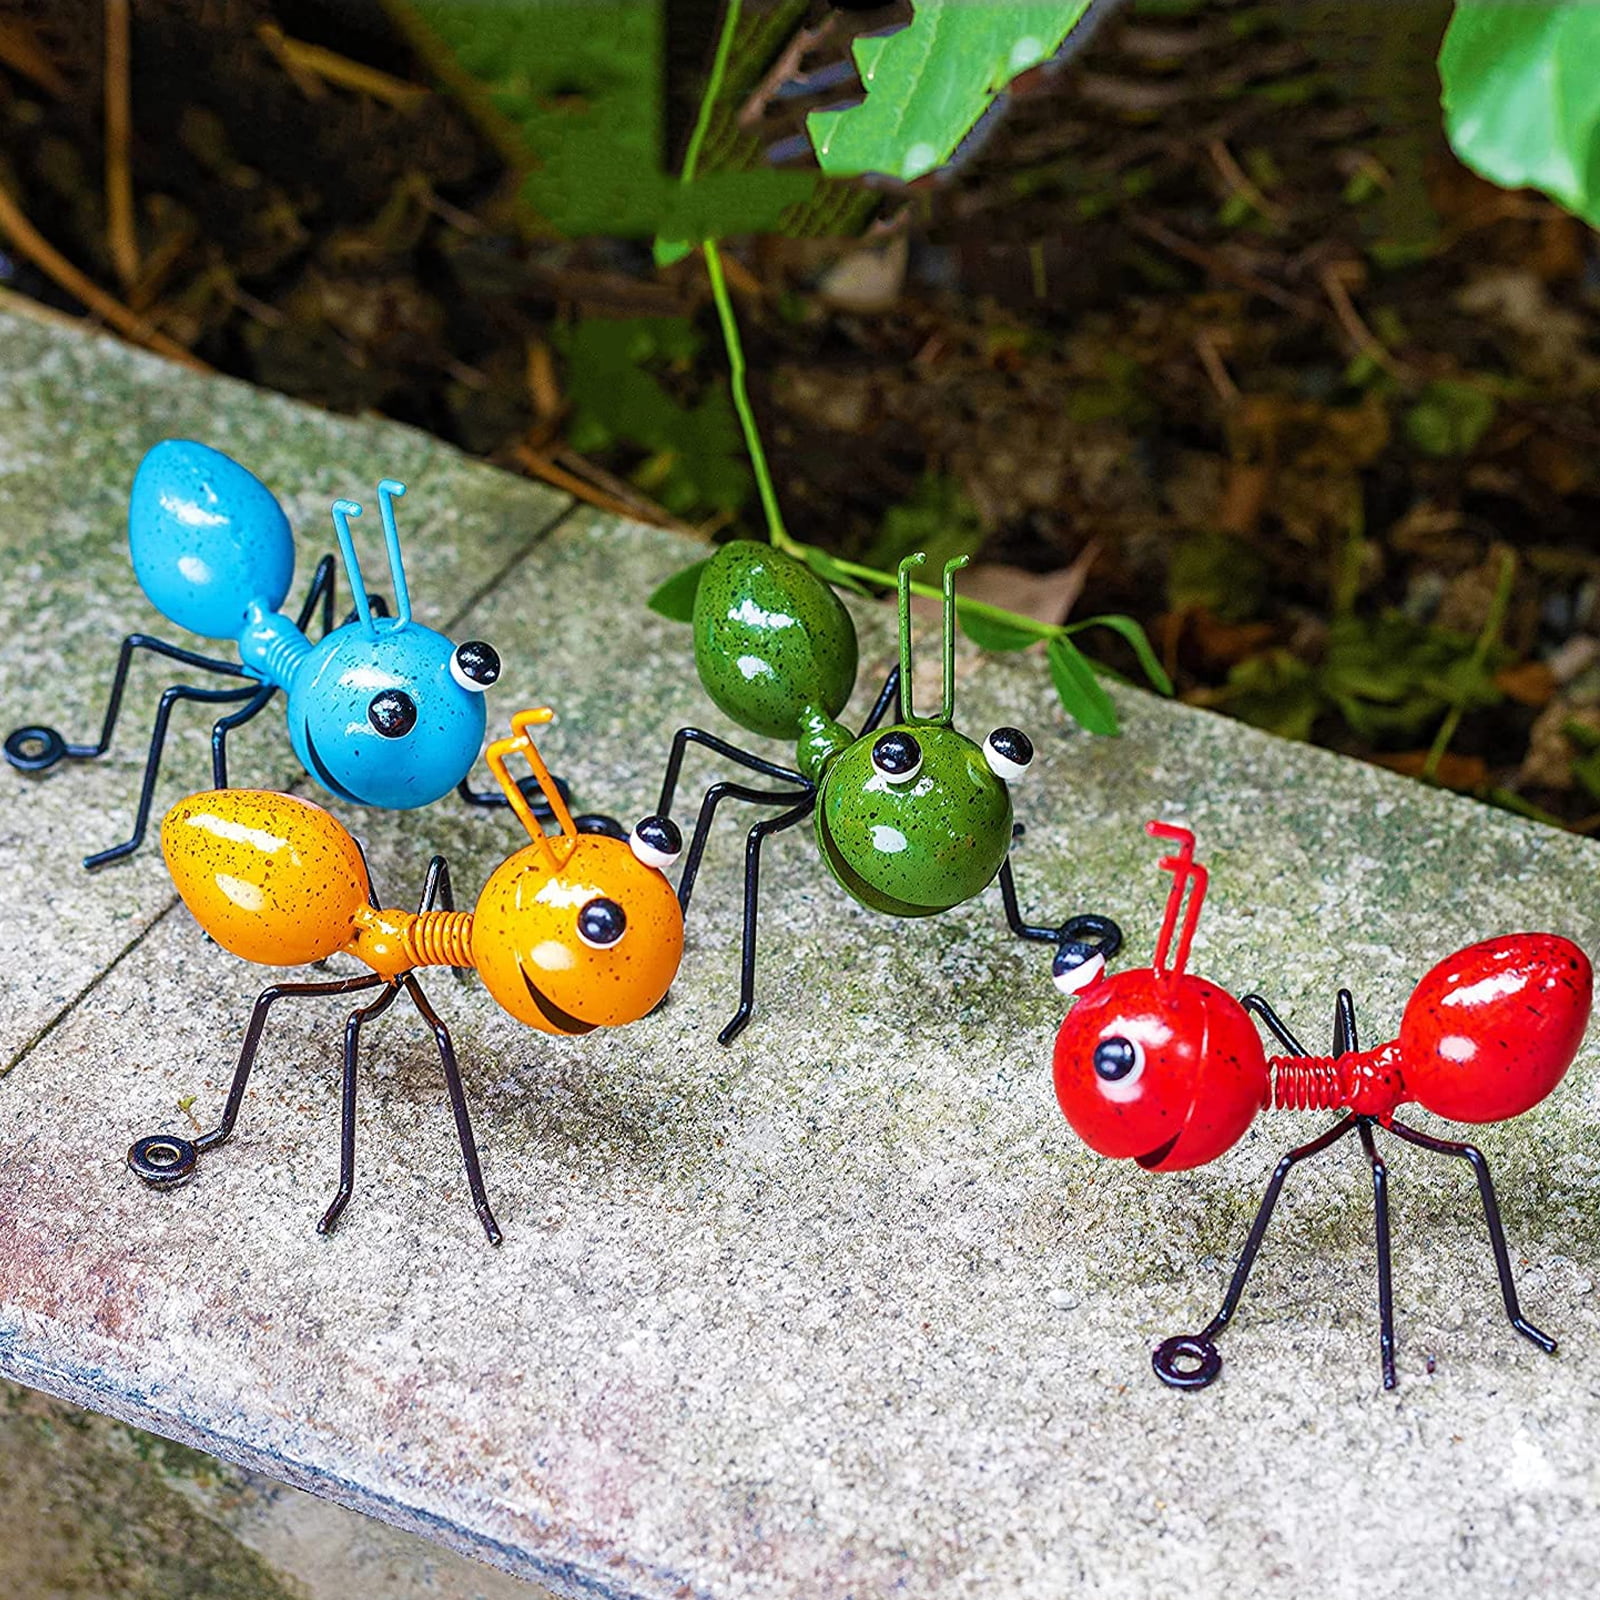 GRNSHTS Metal Ant Garden Yard Decor Outdoor Wall Art Decorations - Ants  Decor Sculptures Ornaments Gifts for Outside Fence Backyard Lawn Tree  Porch, Set of 4 